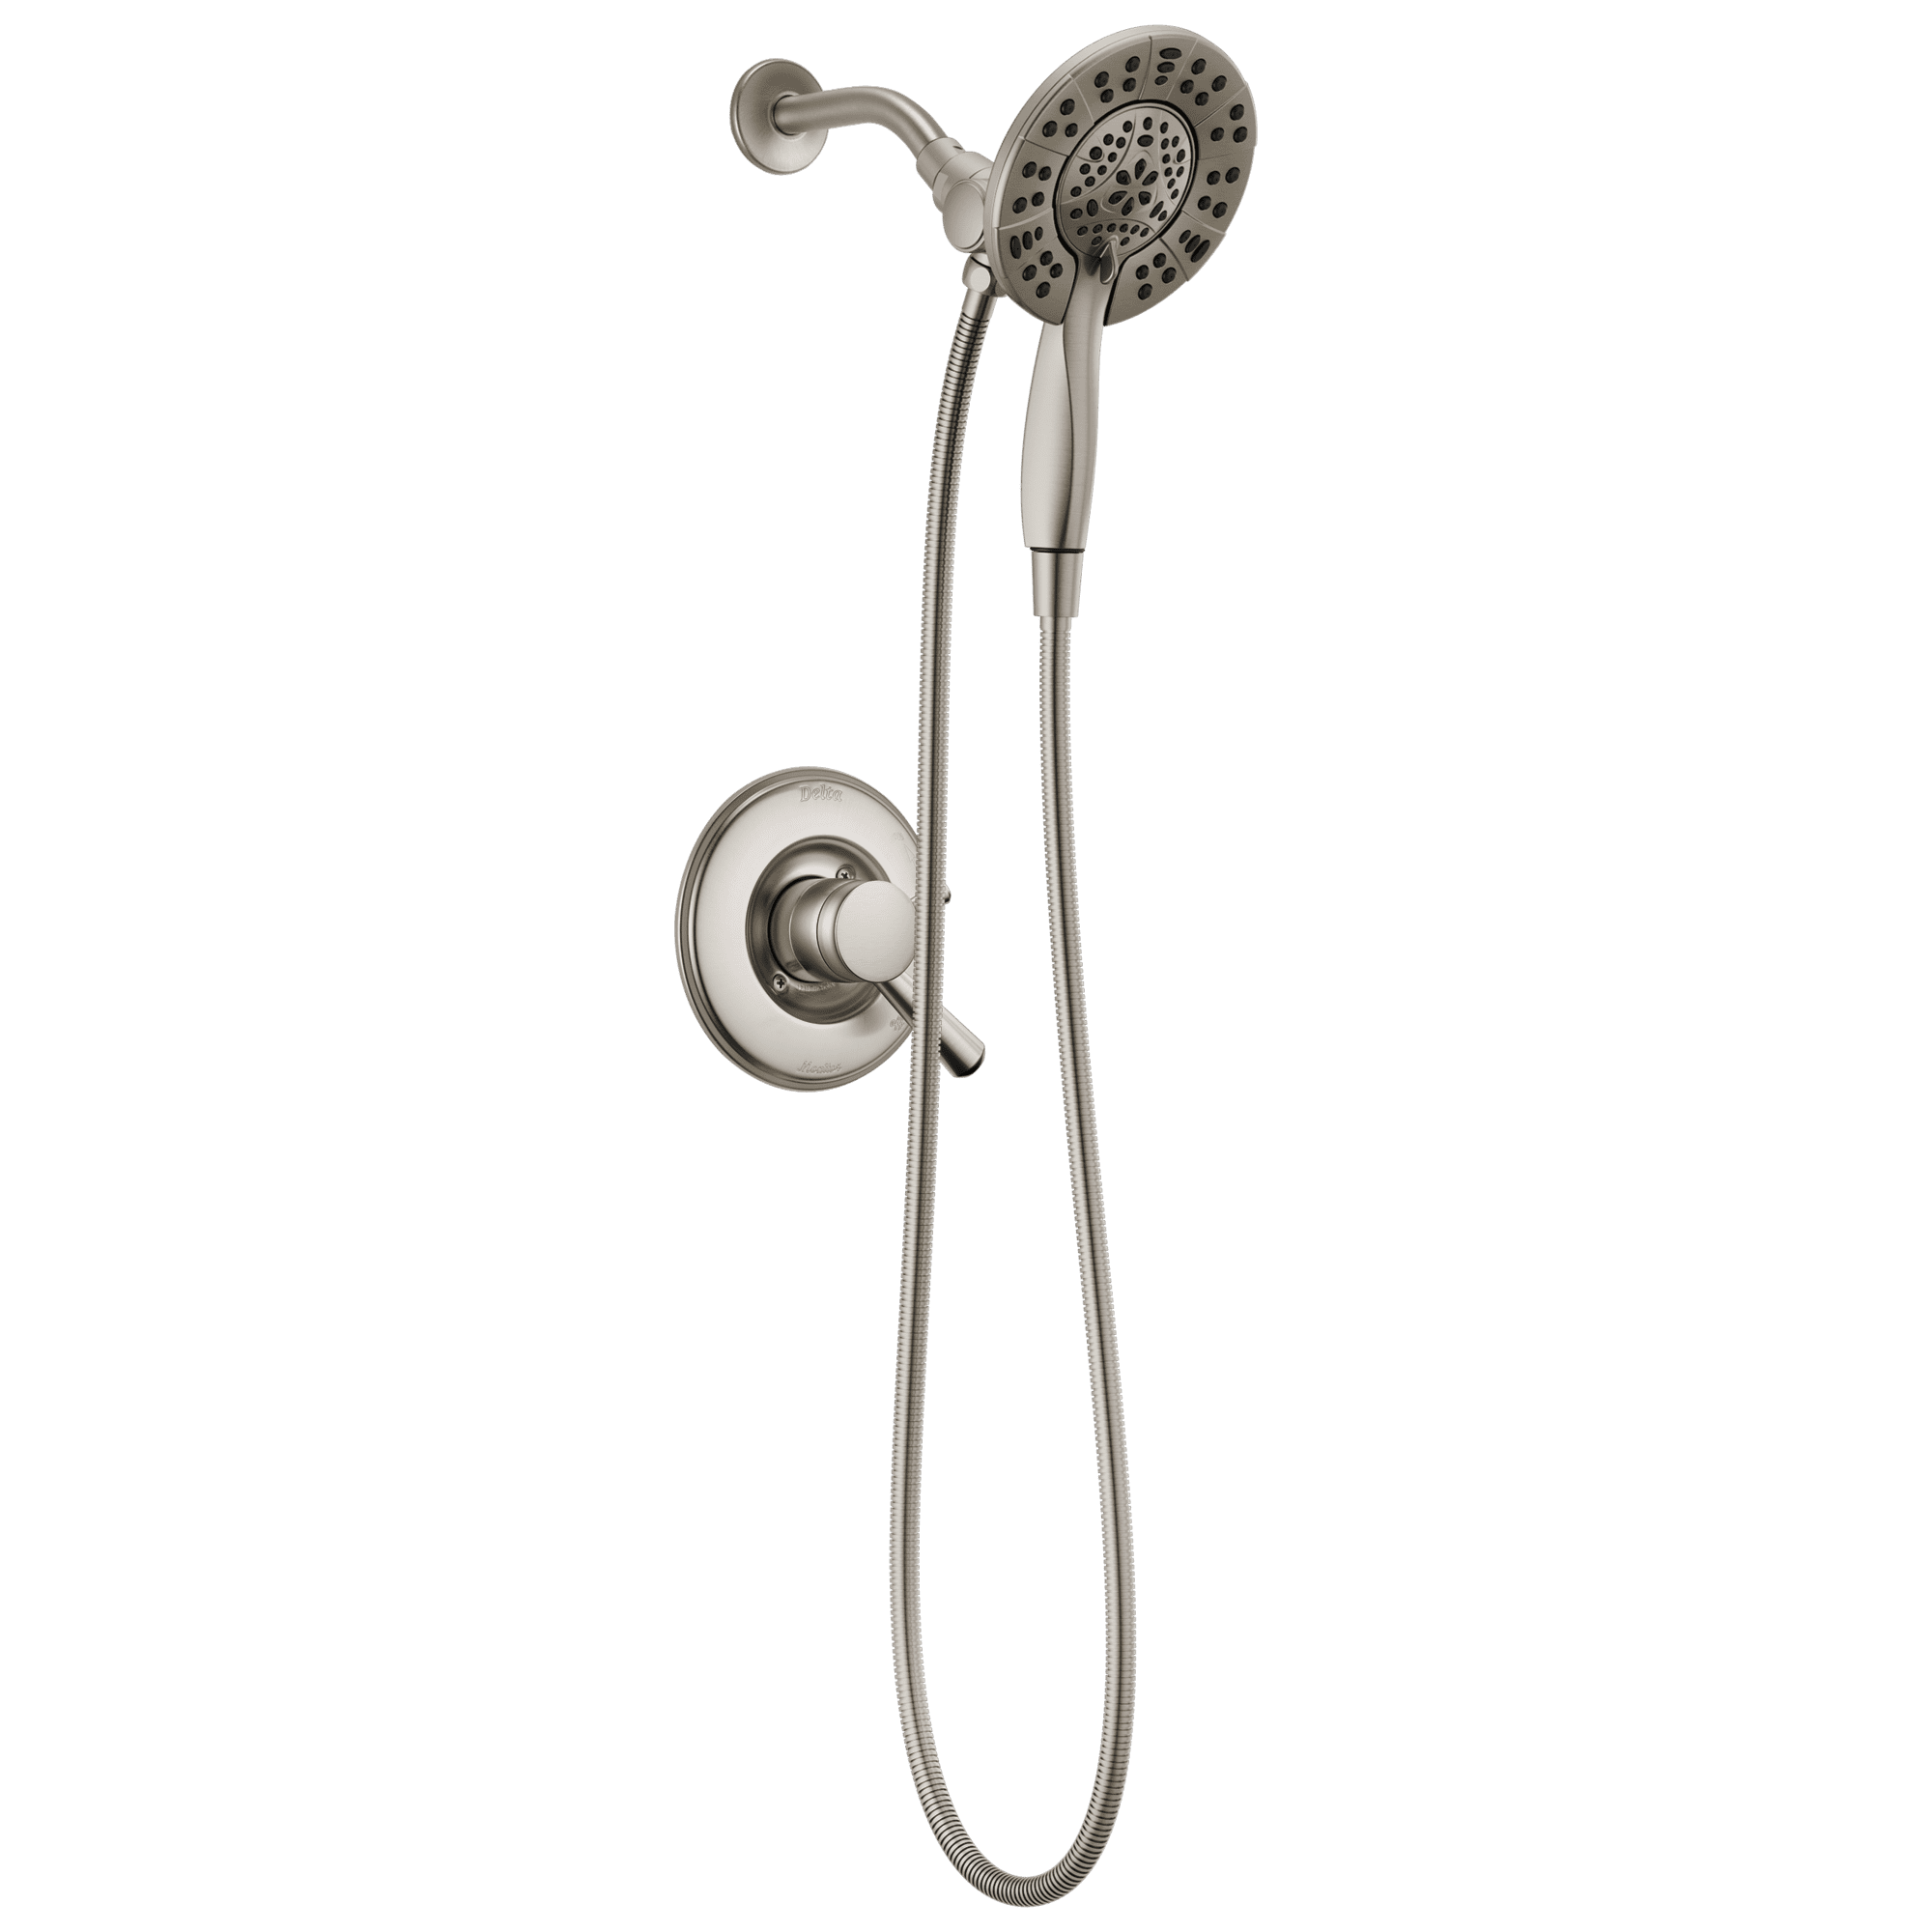 T17293-ss-i Stainless Steel Monitor 17 Series Shower Trim With In2ition Two-in-one Shower